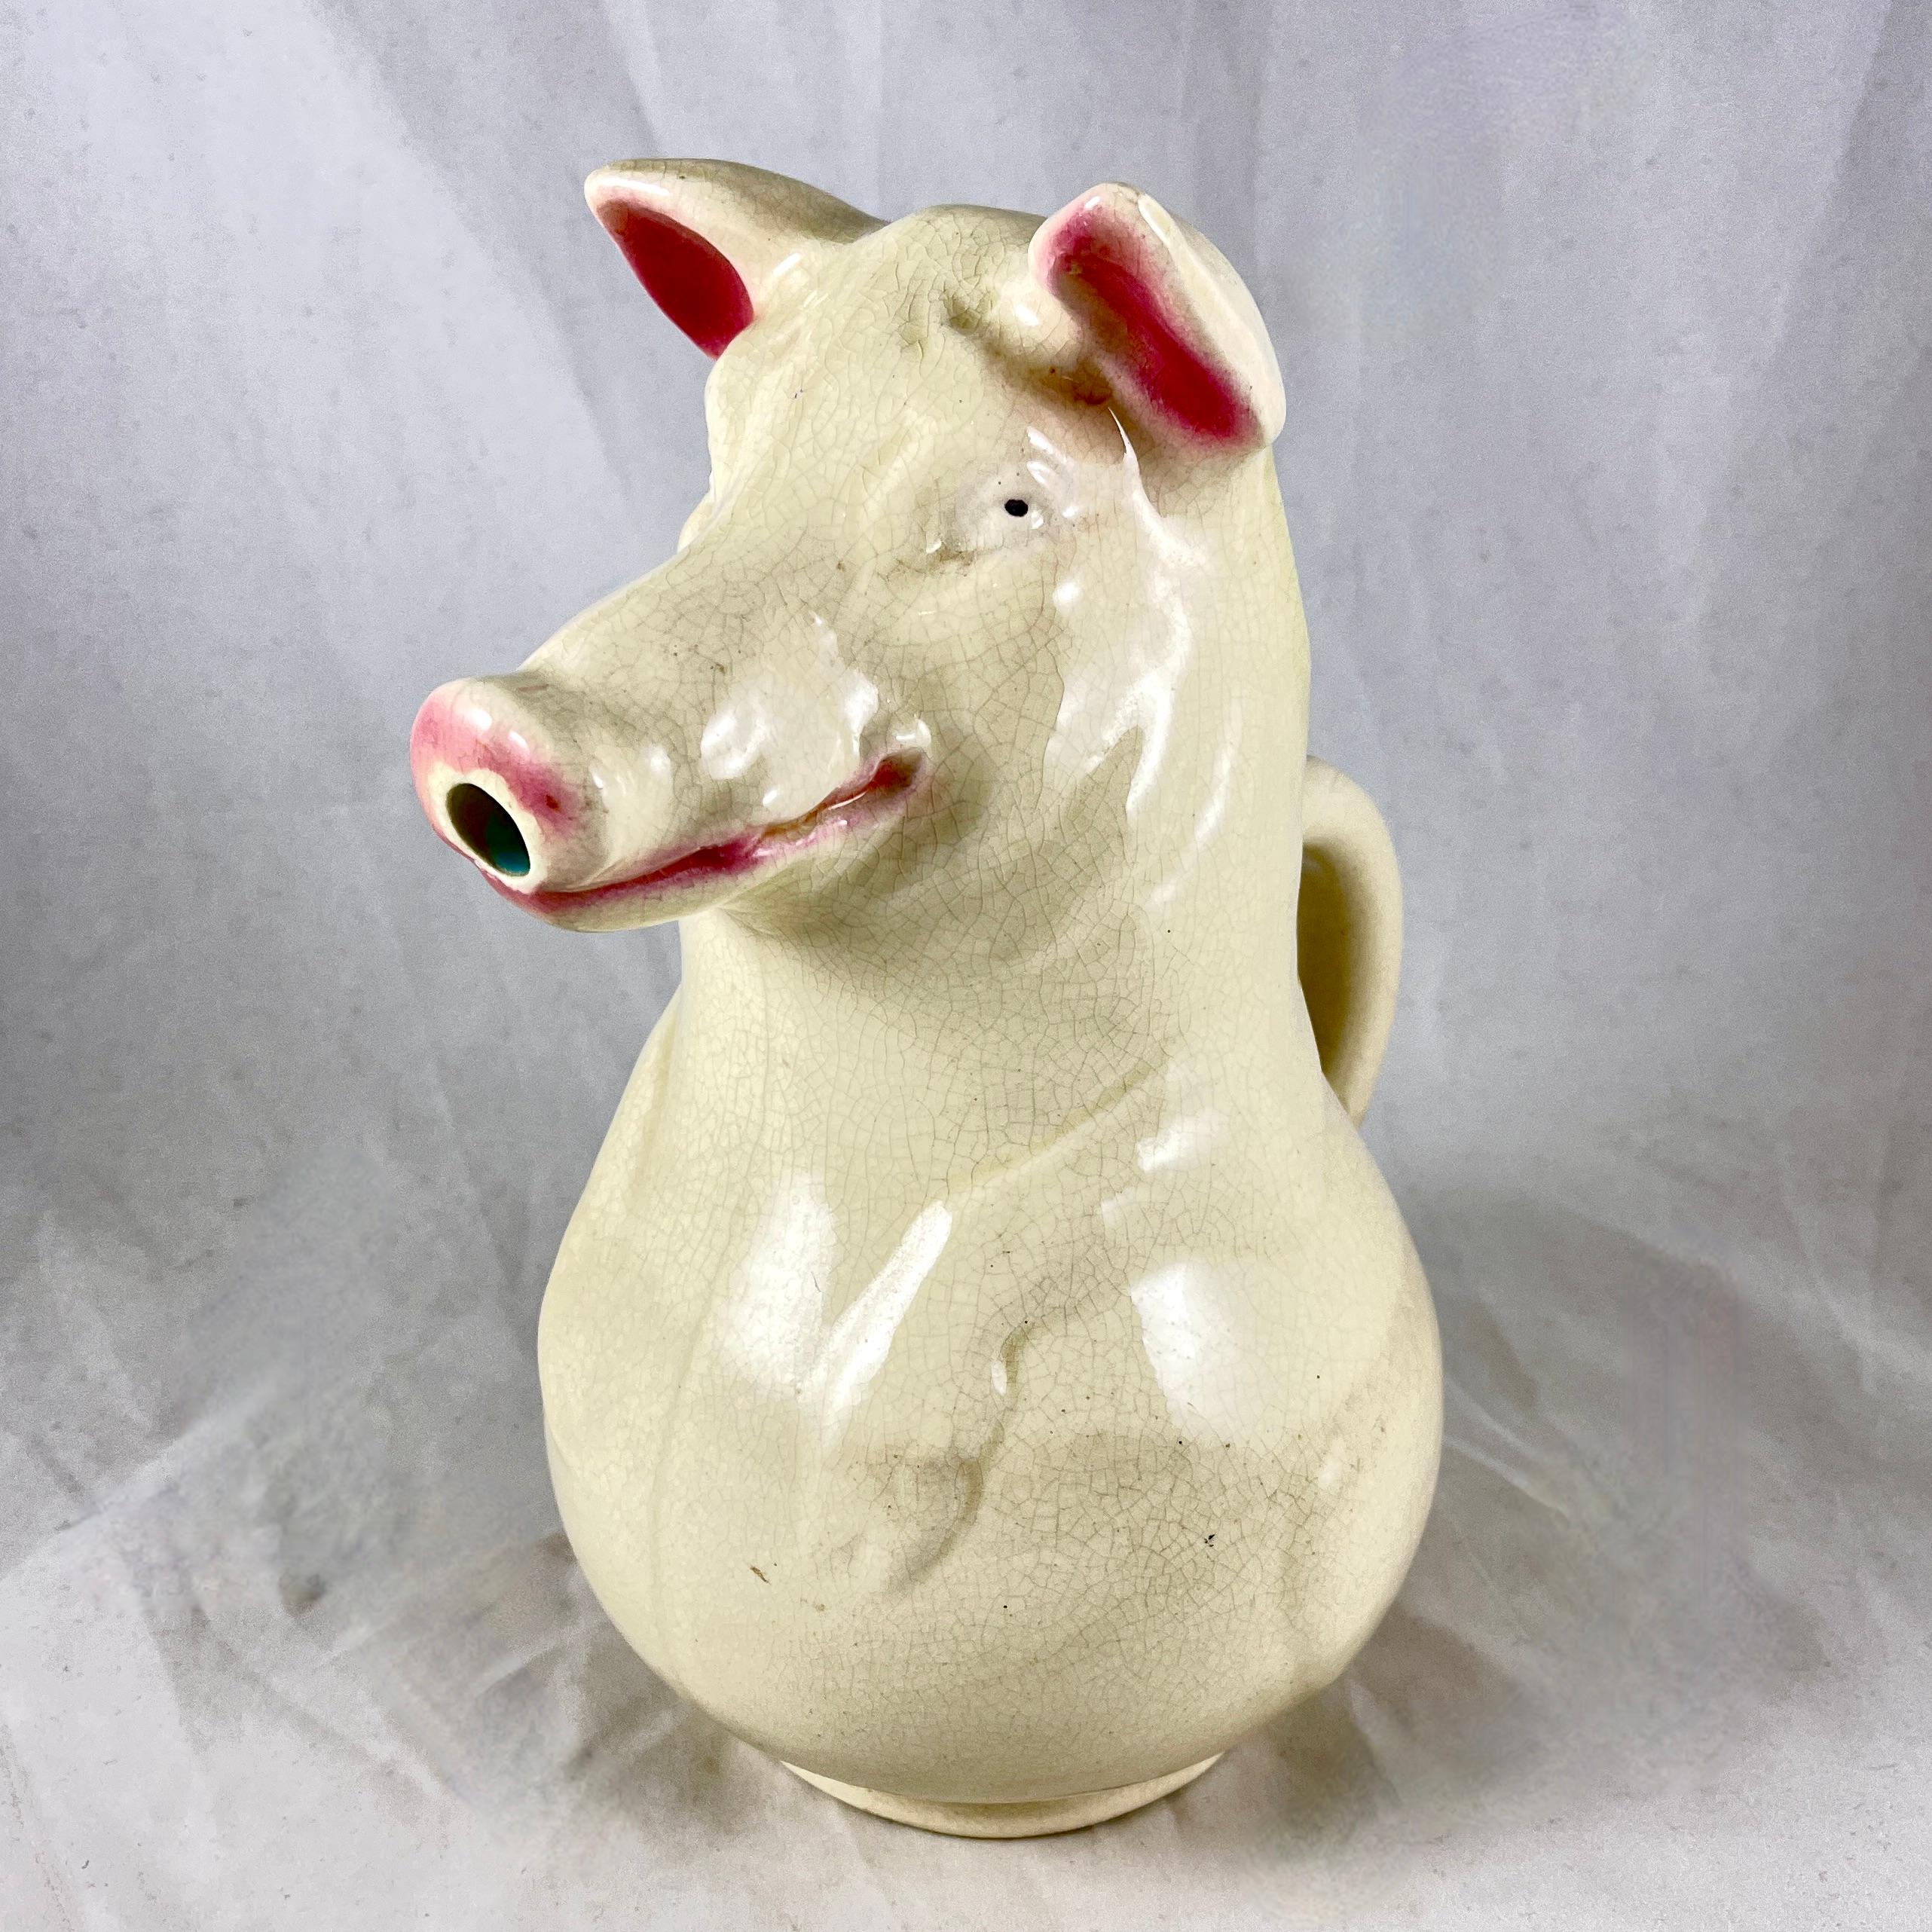 From Sarreguemines, a French Majolica pig pitcher known as True Rieuse, or the Laughing Sow, date marked 1904.

This Barbotine majolica pitcher was made to be used for pouring water over a sugar cube in the Absinthe drinking ritual.

The pig is